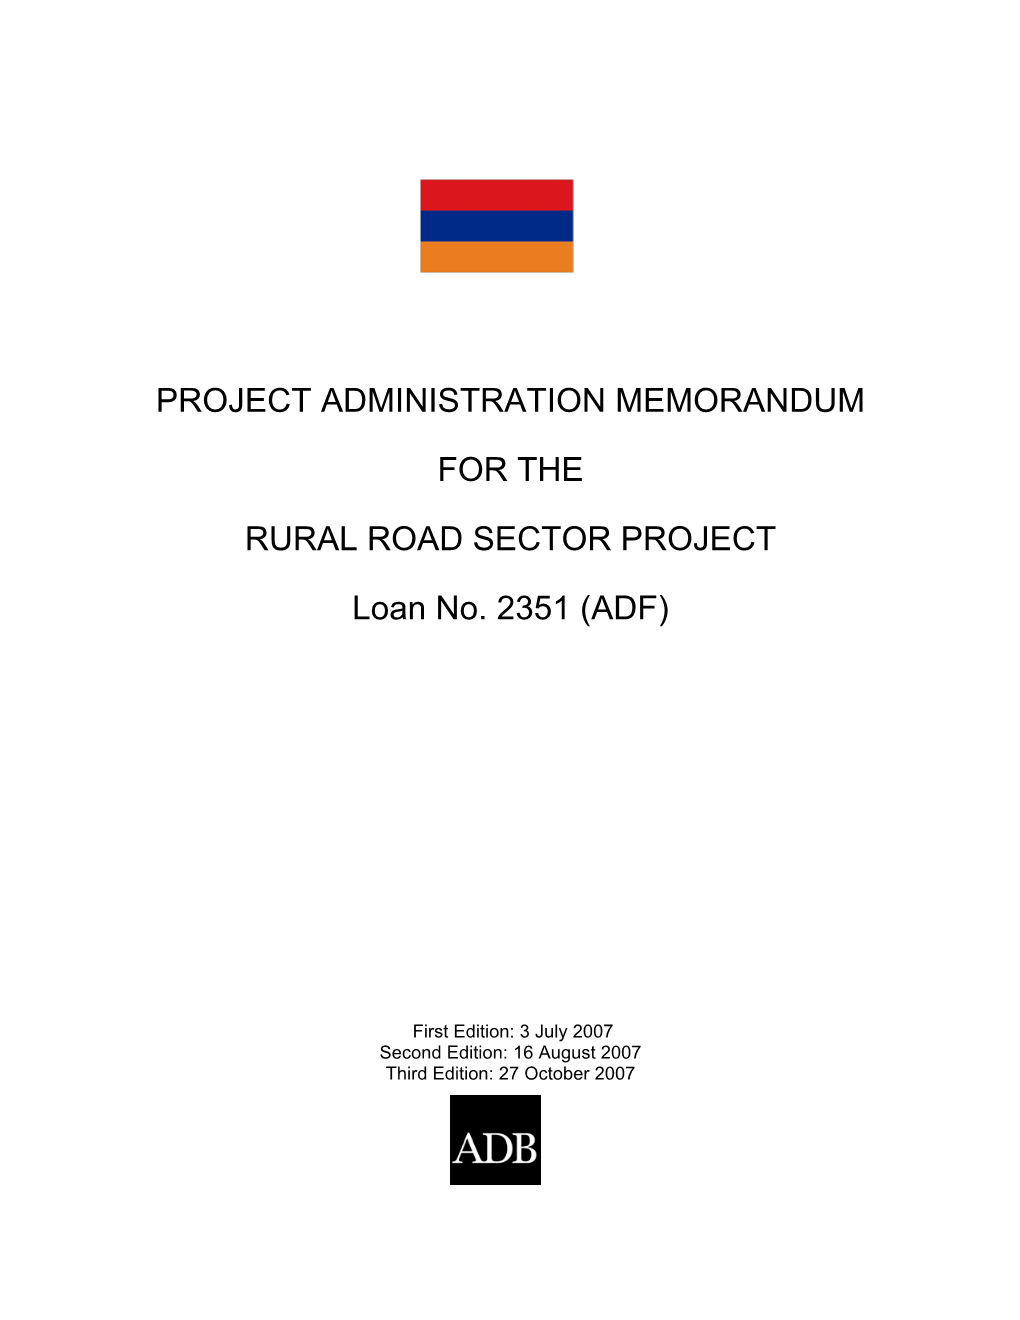 Rural Road Sector Project